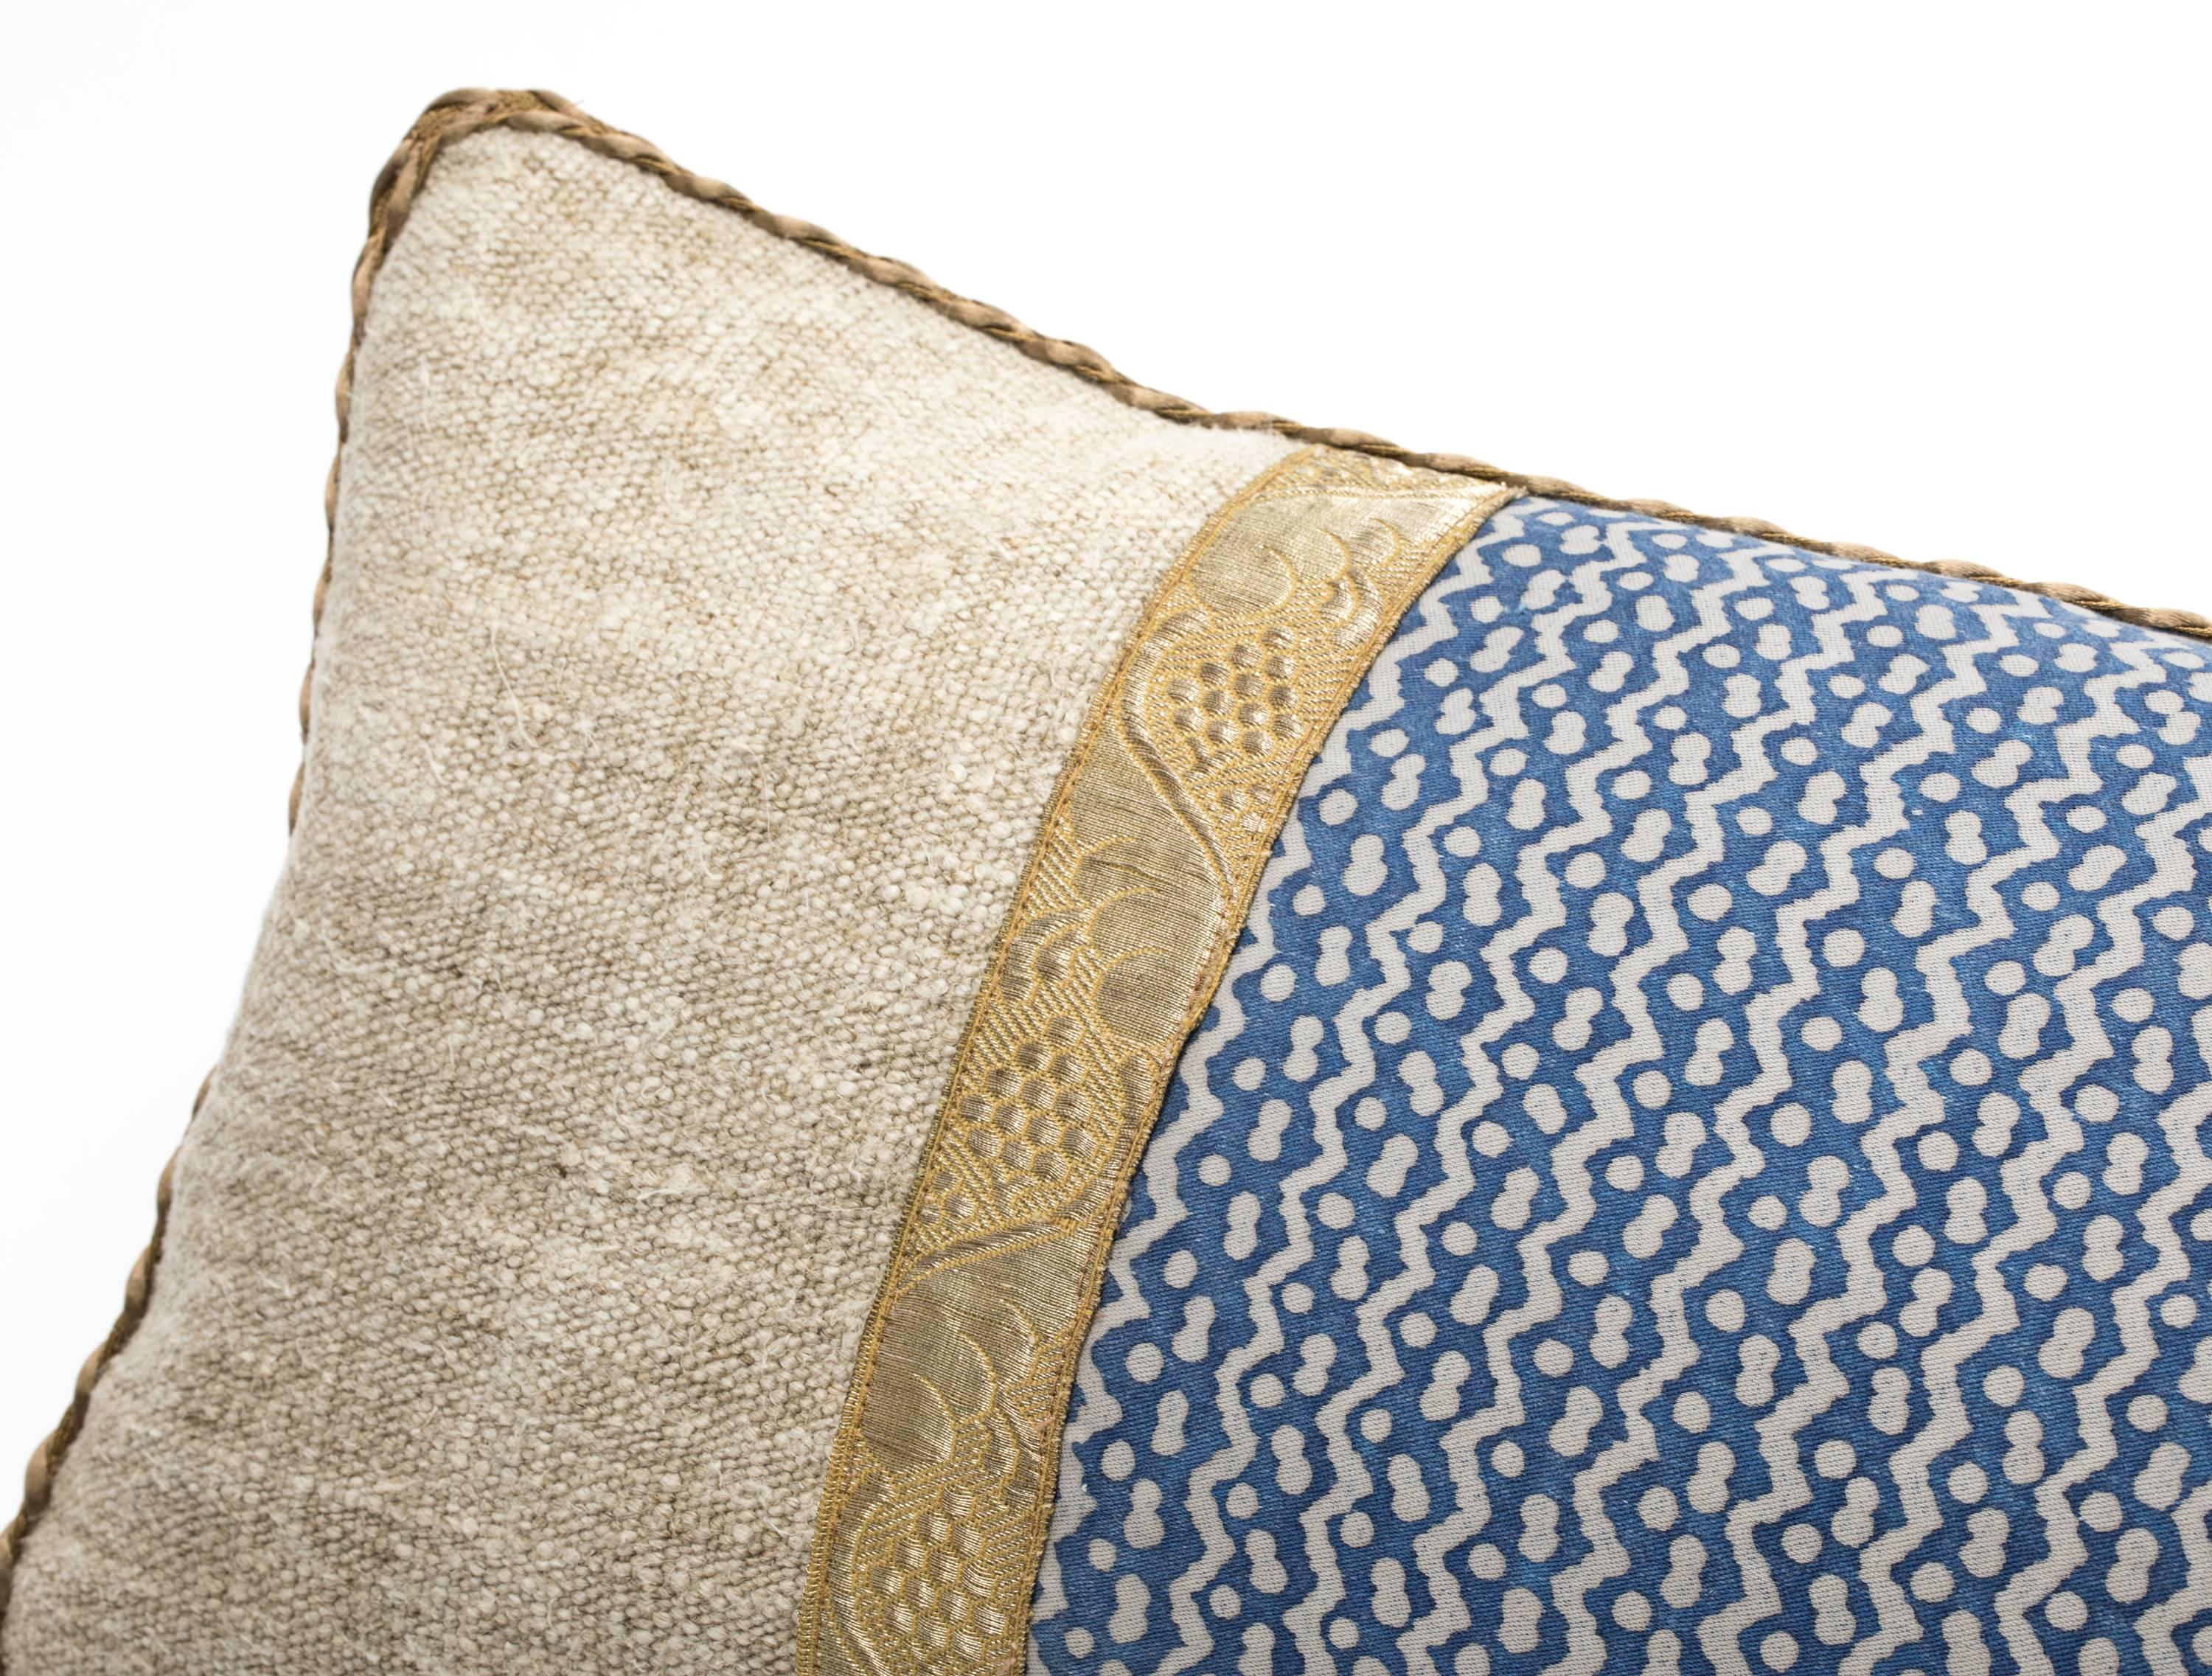 Contemporary Fortuny with Antique Metallic Trim on Vintage Linen Pillow